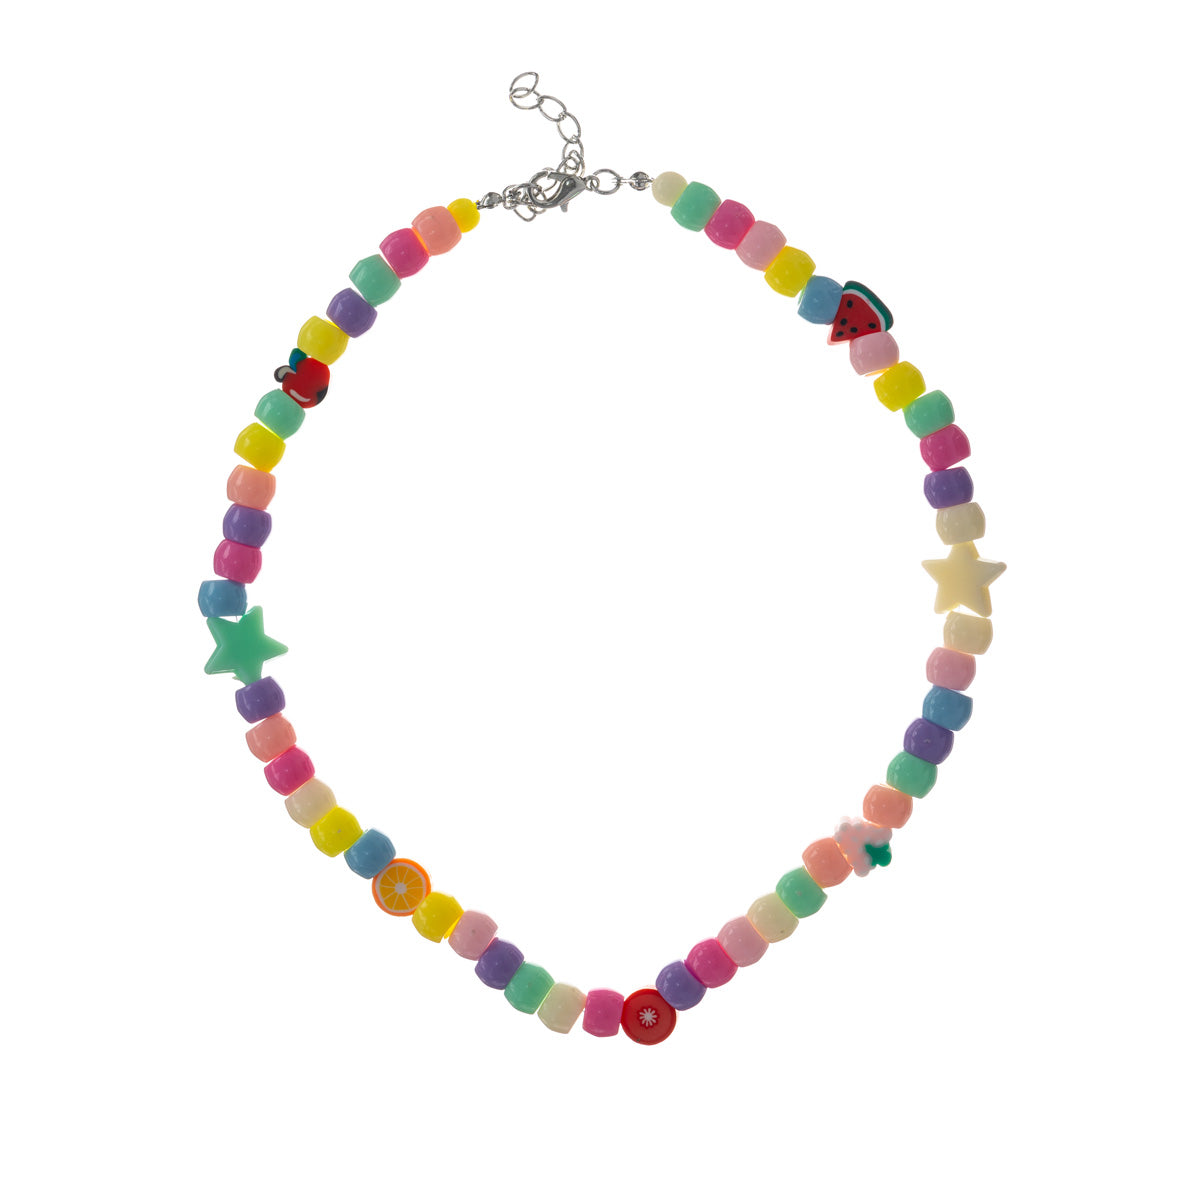 Colored beads necklace